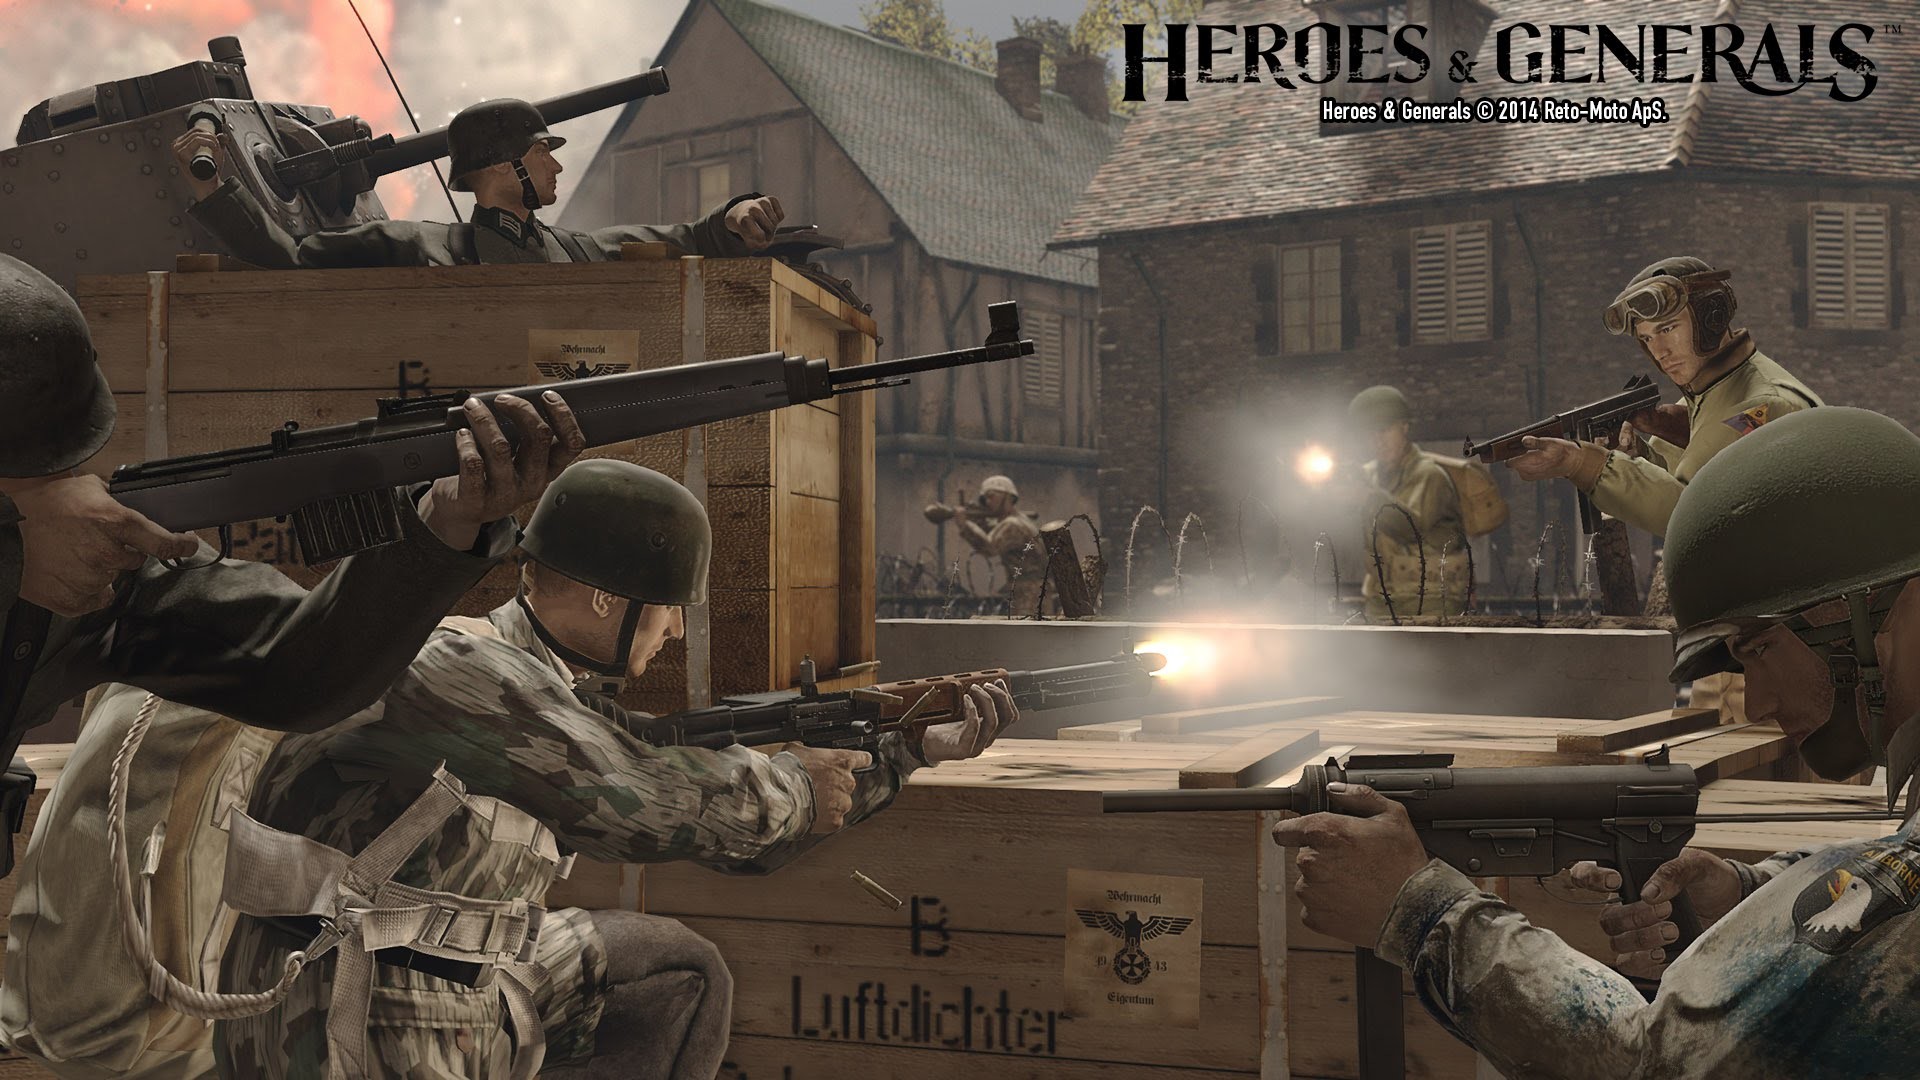 1920x1080 Heroes and Generals Live Commentary #1! (Heroes and Generals Gameplay)